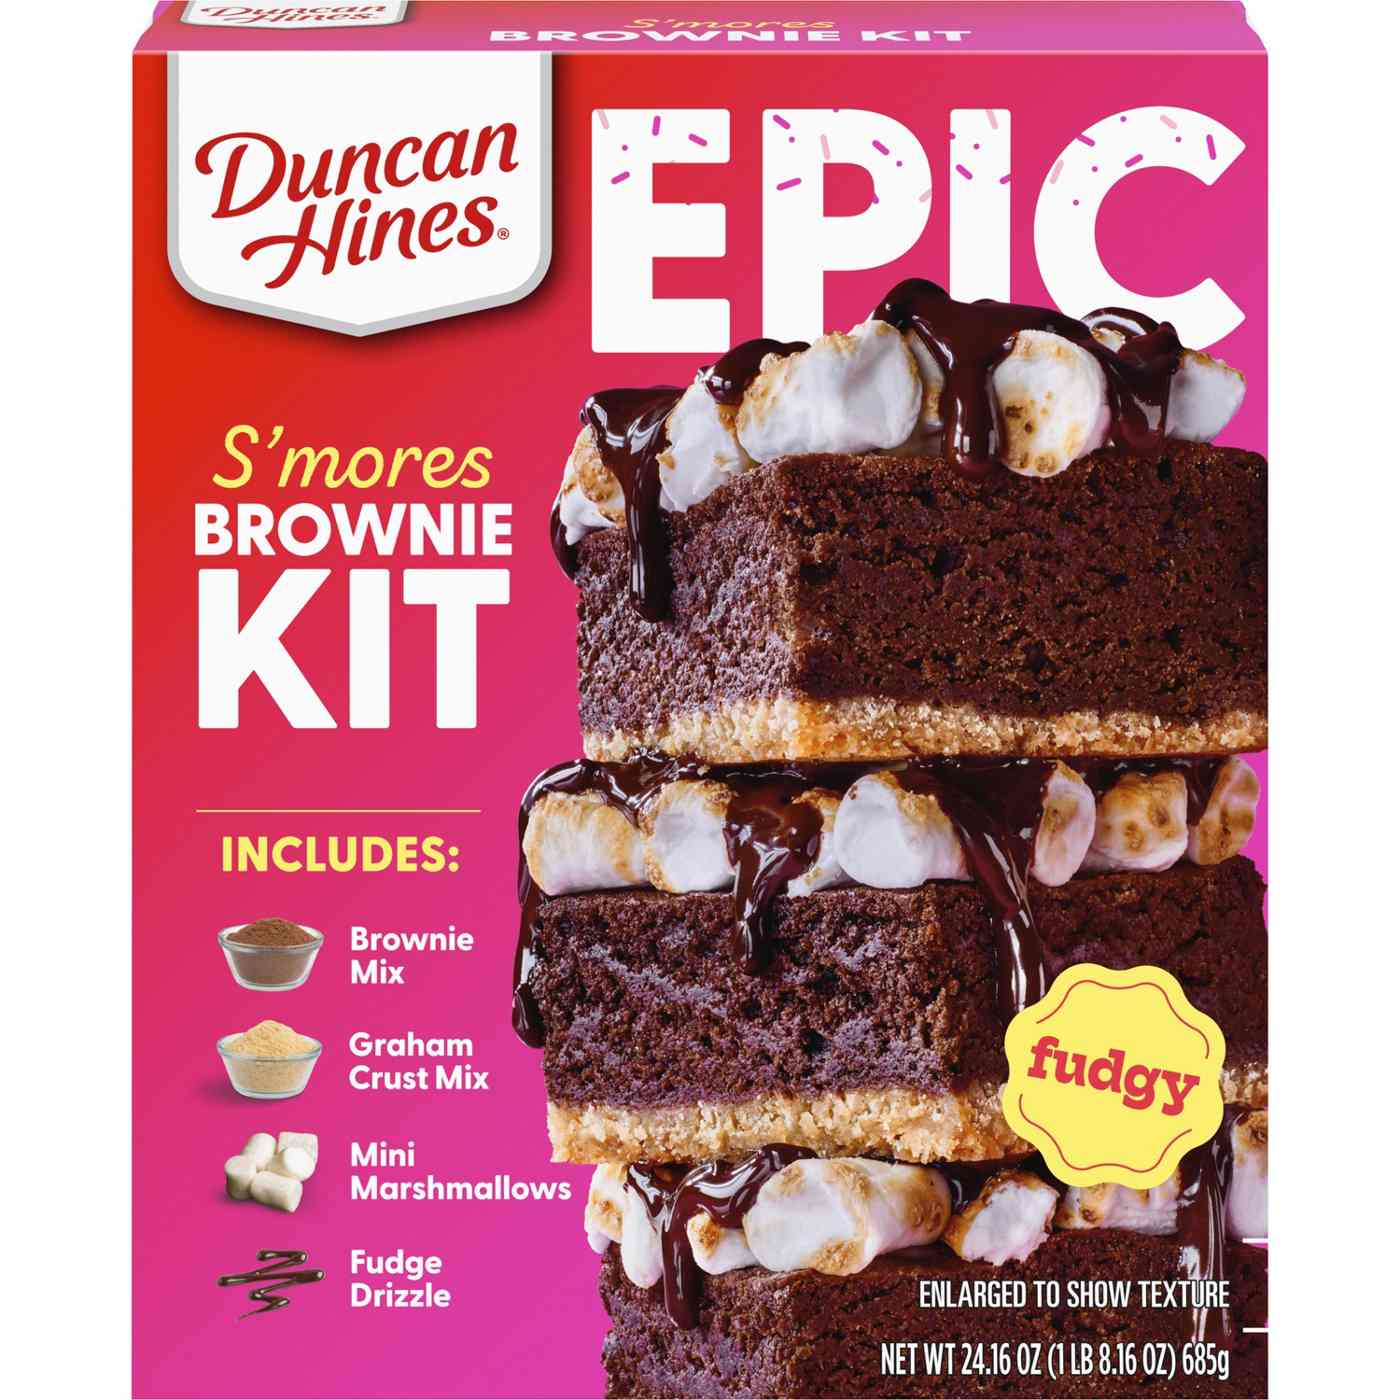 Duncan Hines EPIC Smores Brownie Mix Kit; image 1 of 7